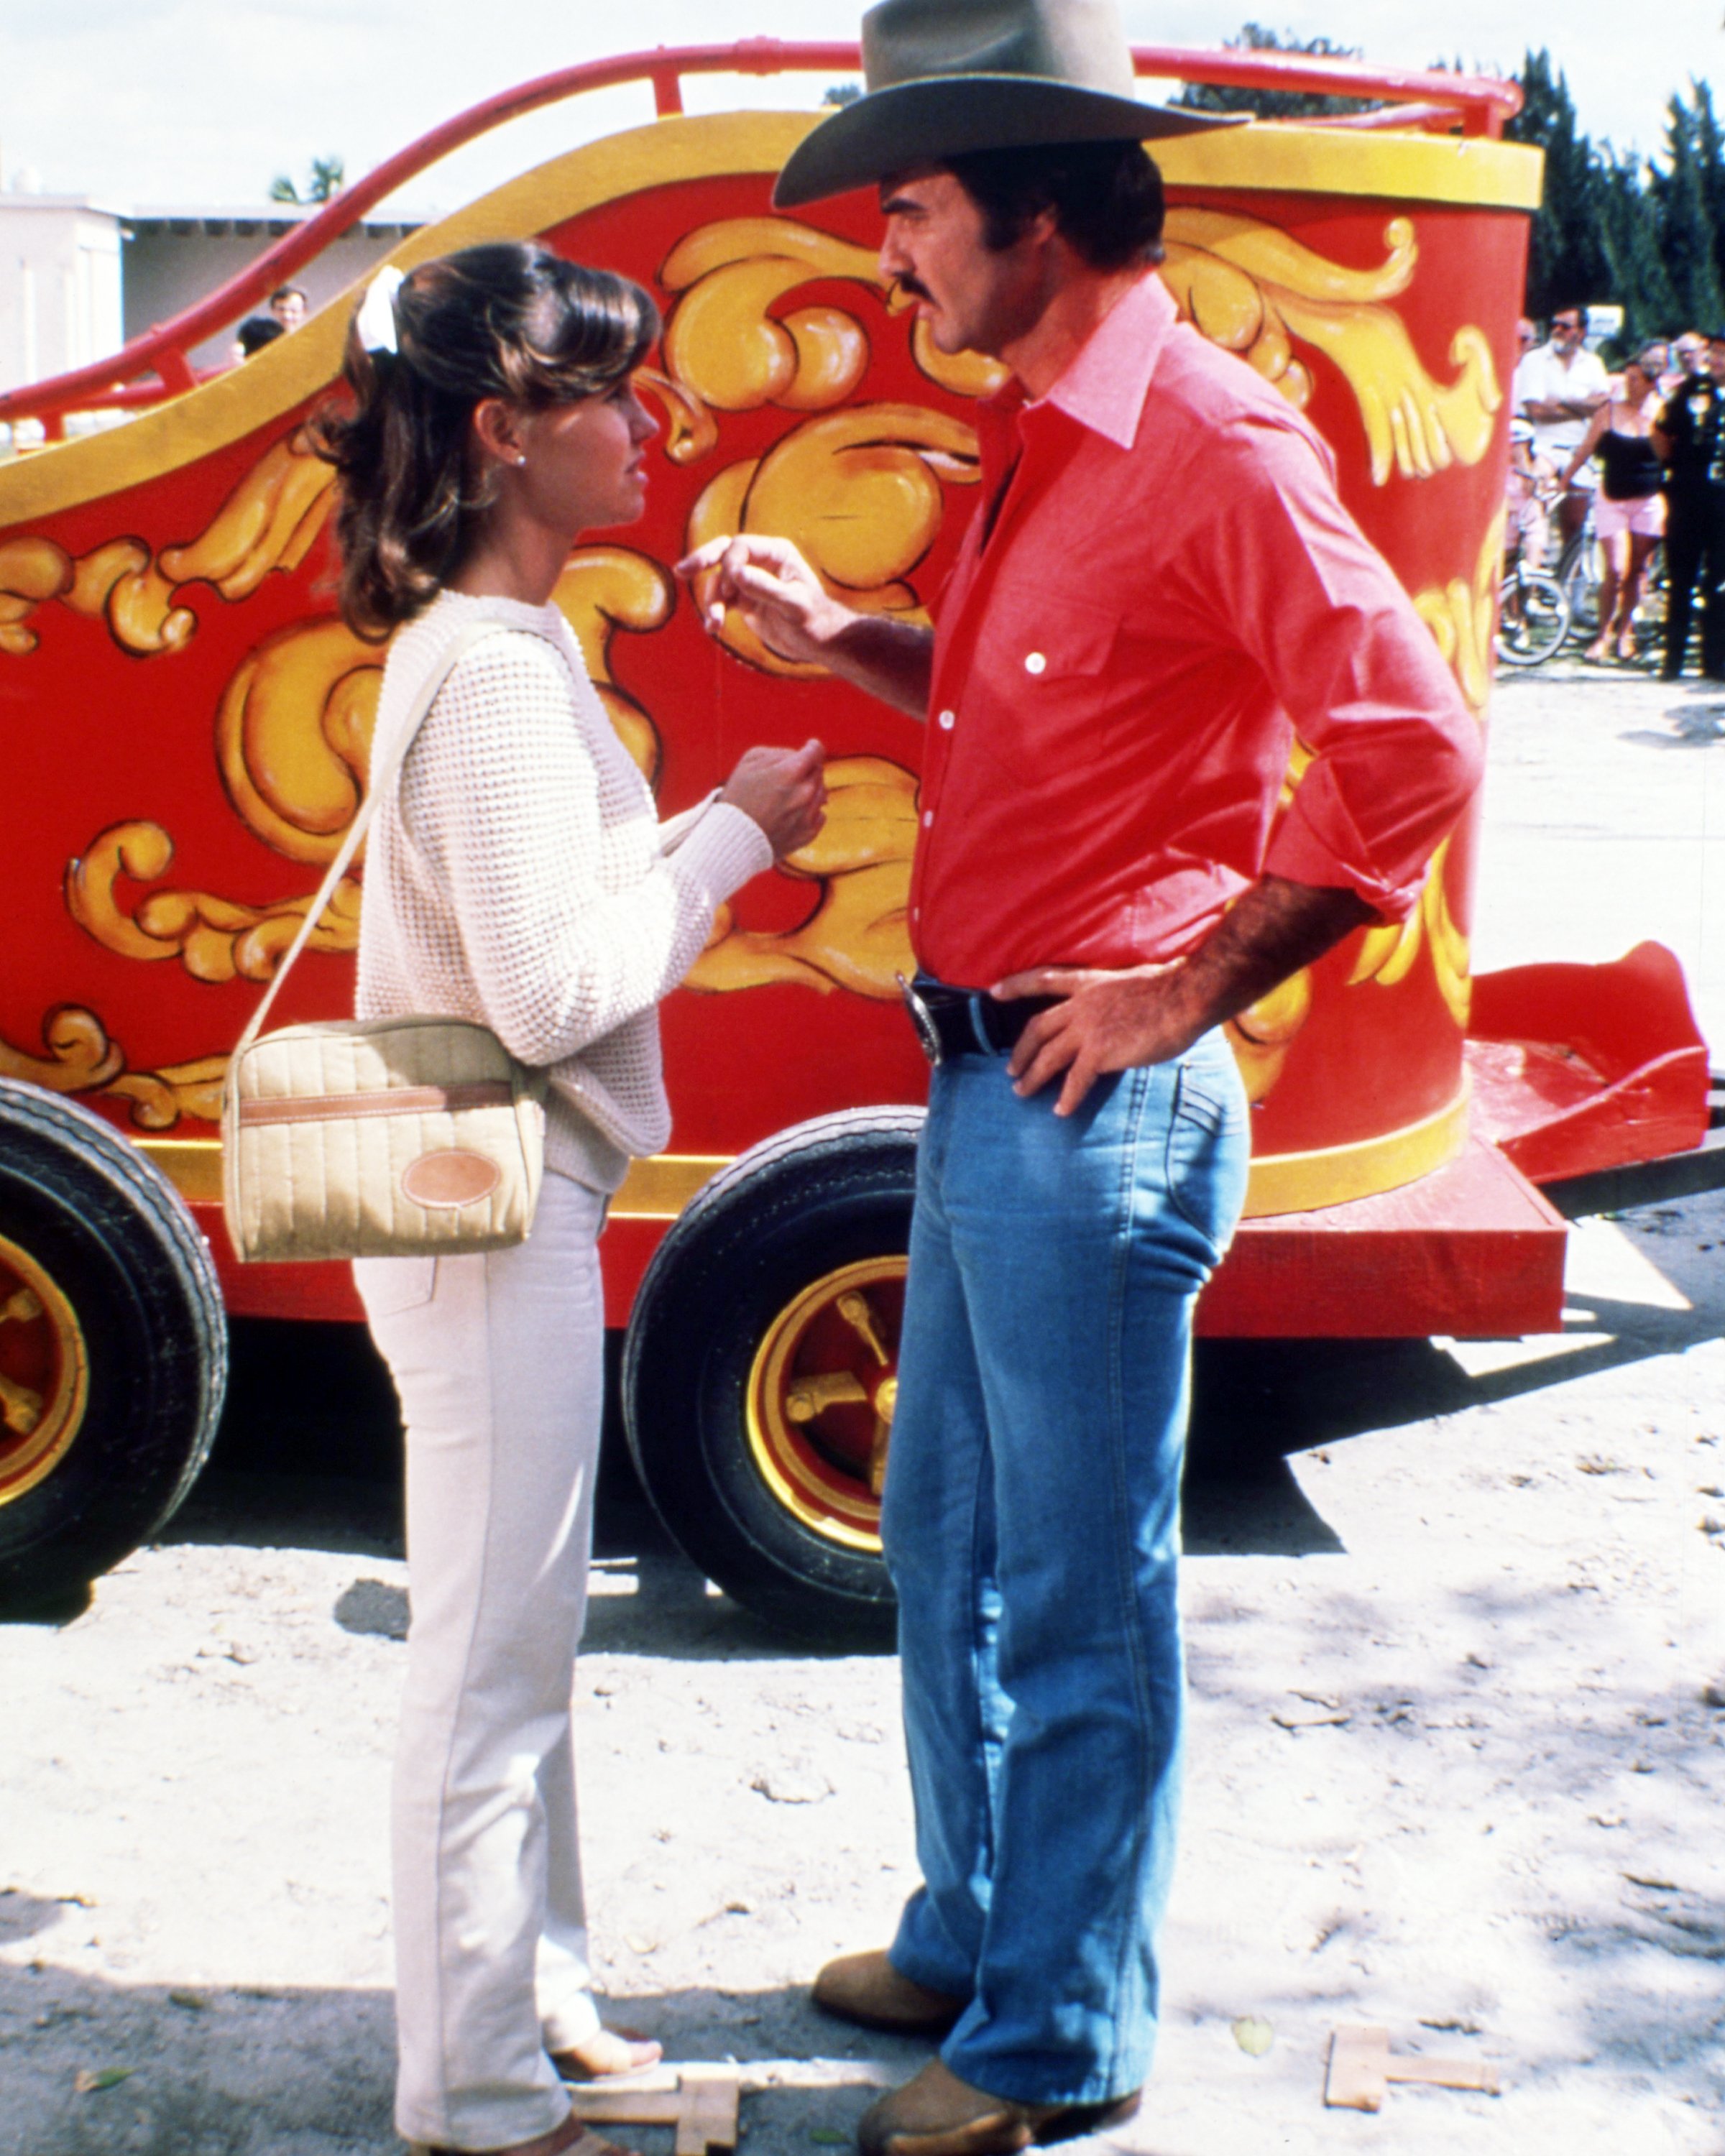 Burt Reynolds and Sally Field in "Smokey And The Bandit" in 1977 | Source: Getty Images